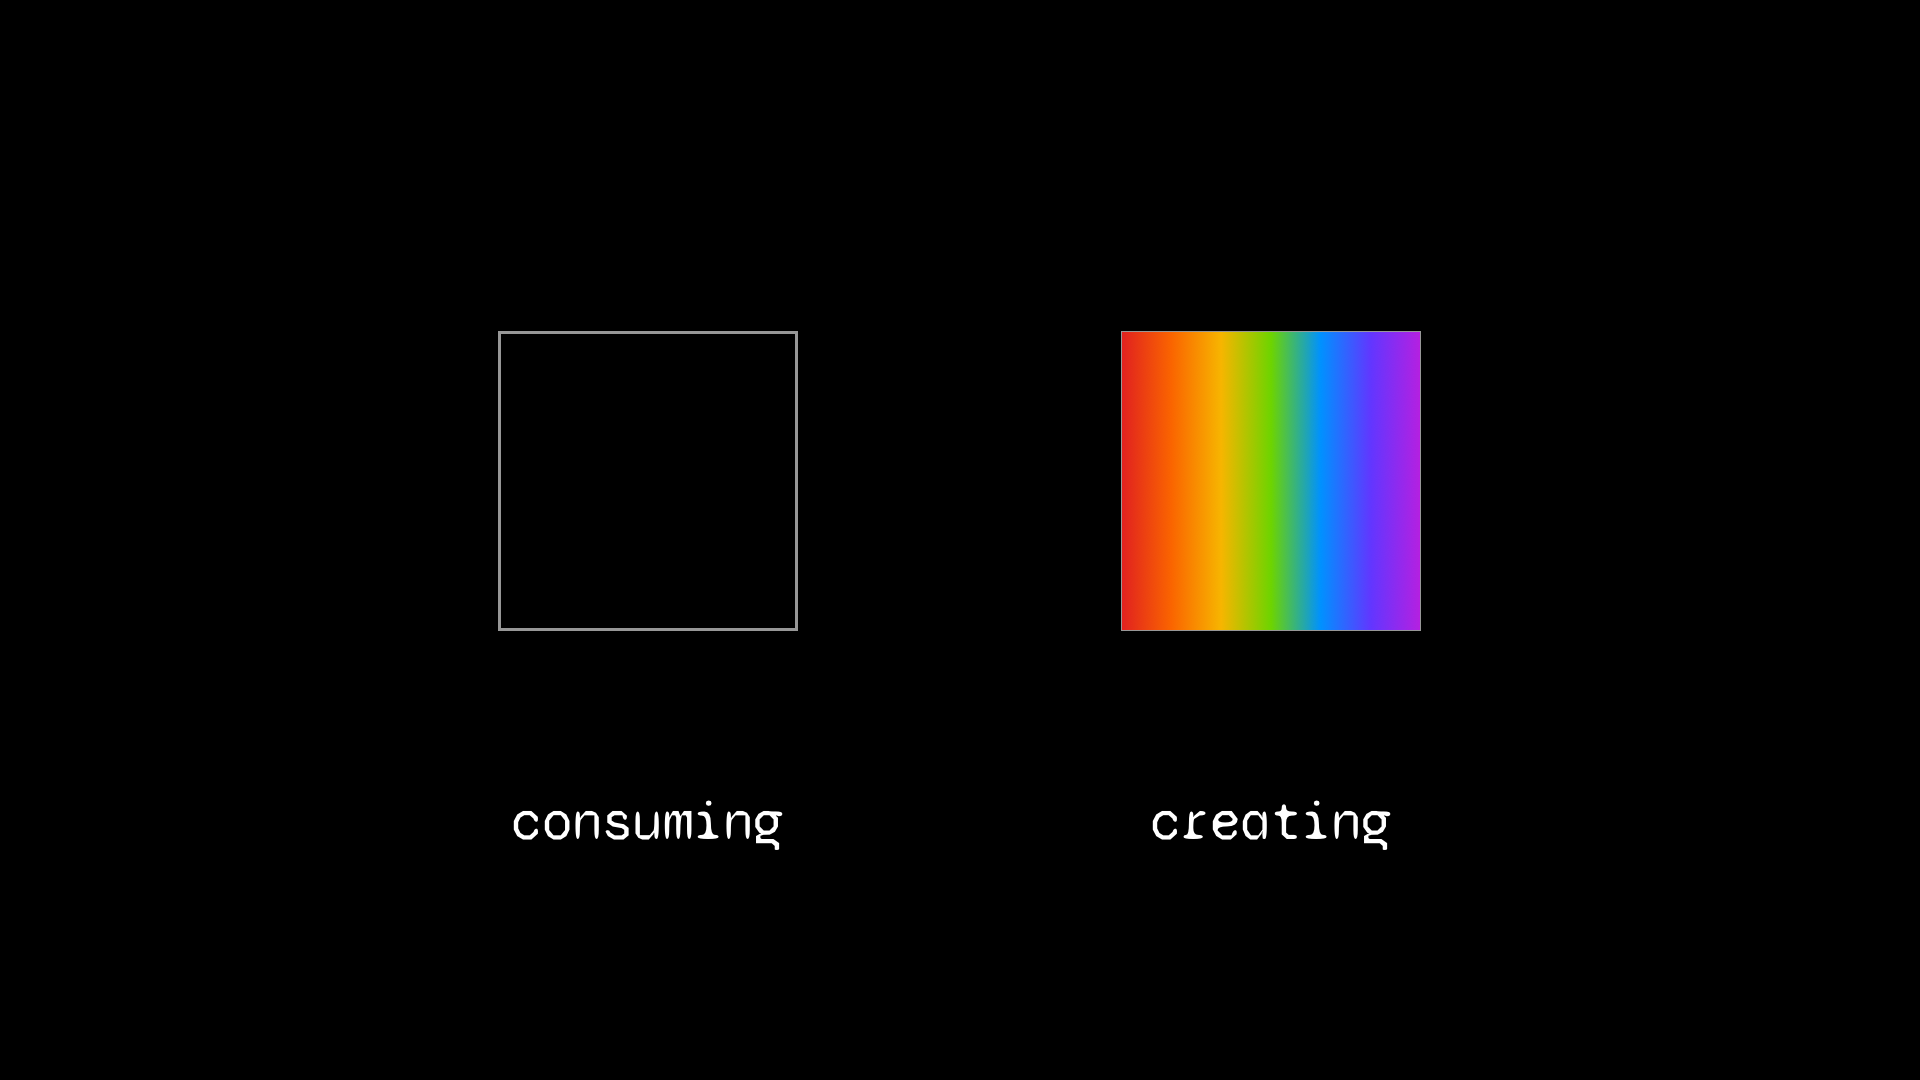 consuming vs creating rainbow image compare